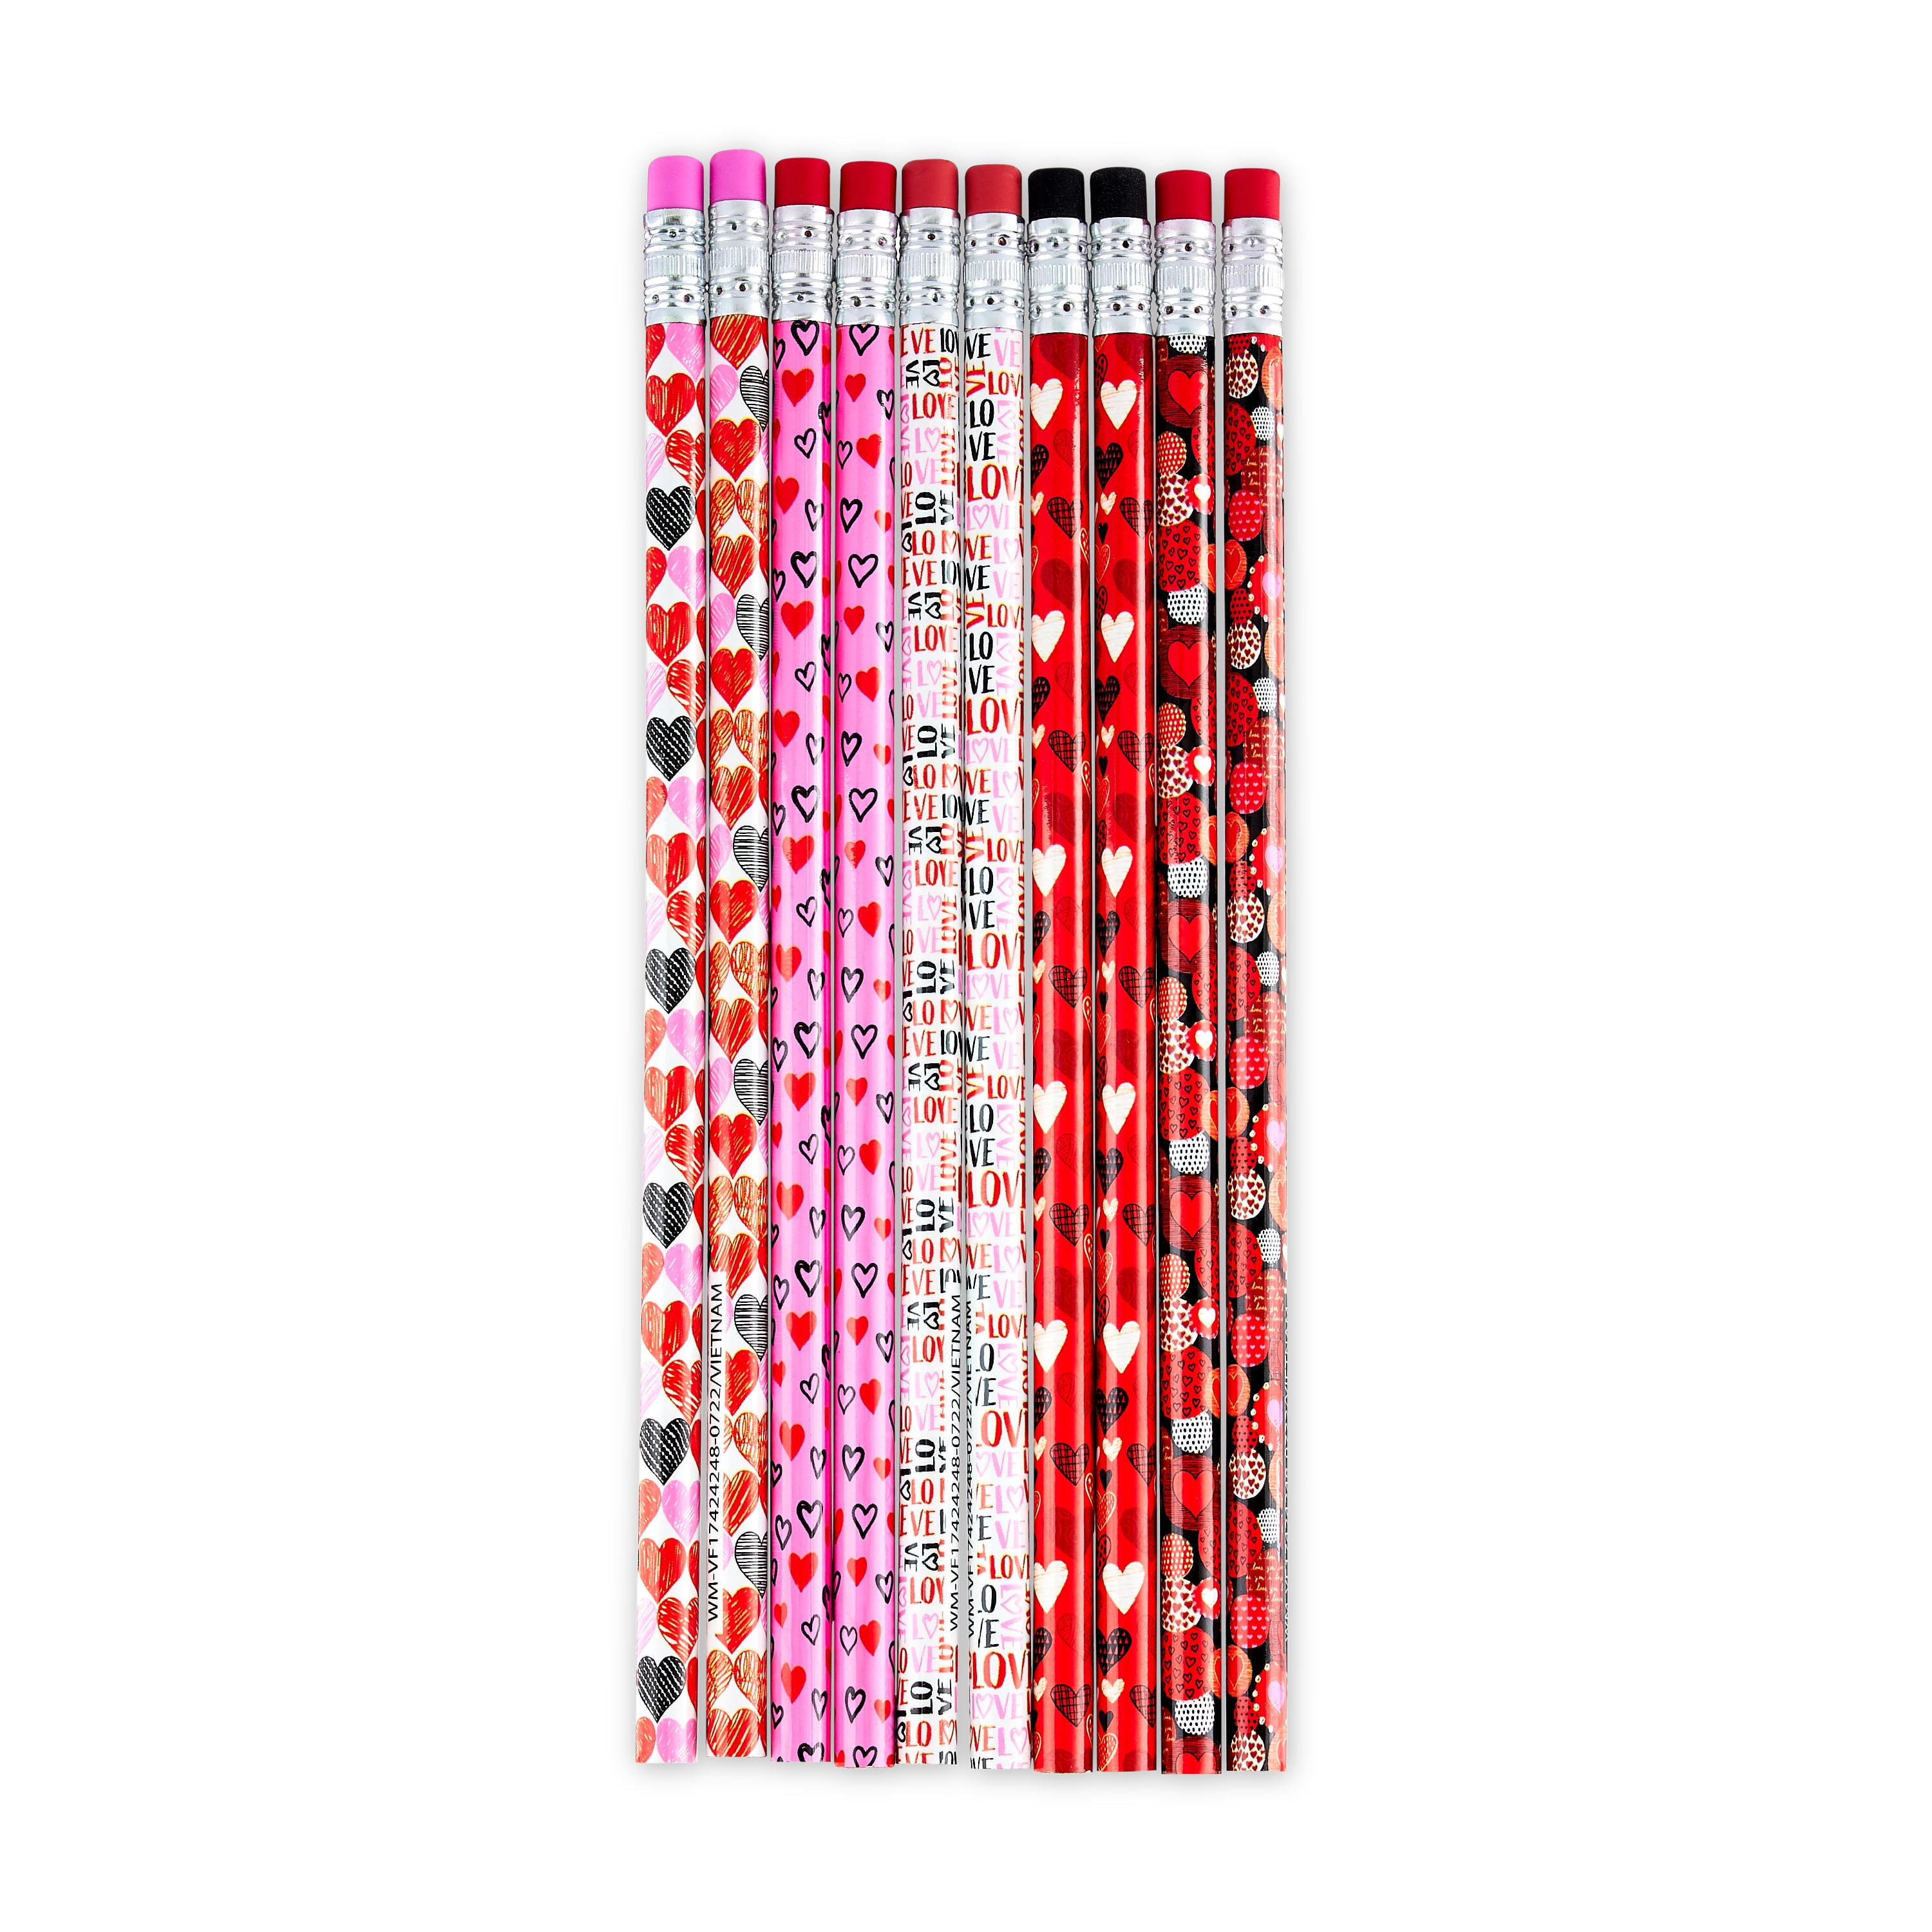 WAY TO CELEBRATE! Way To Celebrate Valentine's Day Hearts & Love Pencils, 10 Count